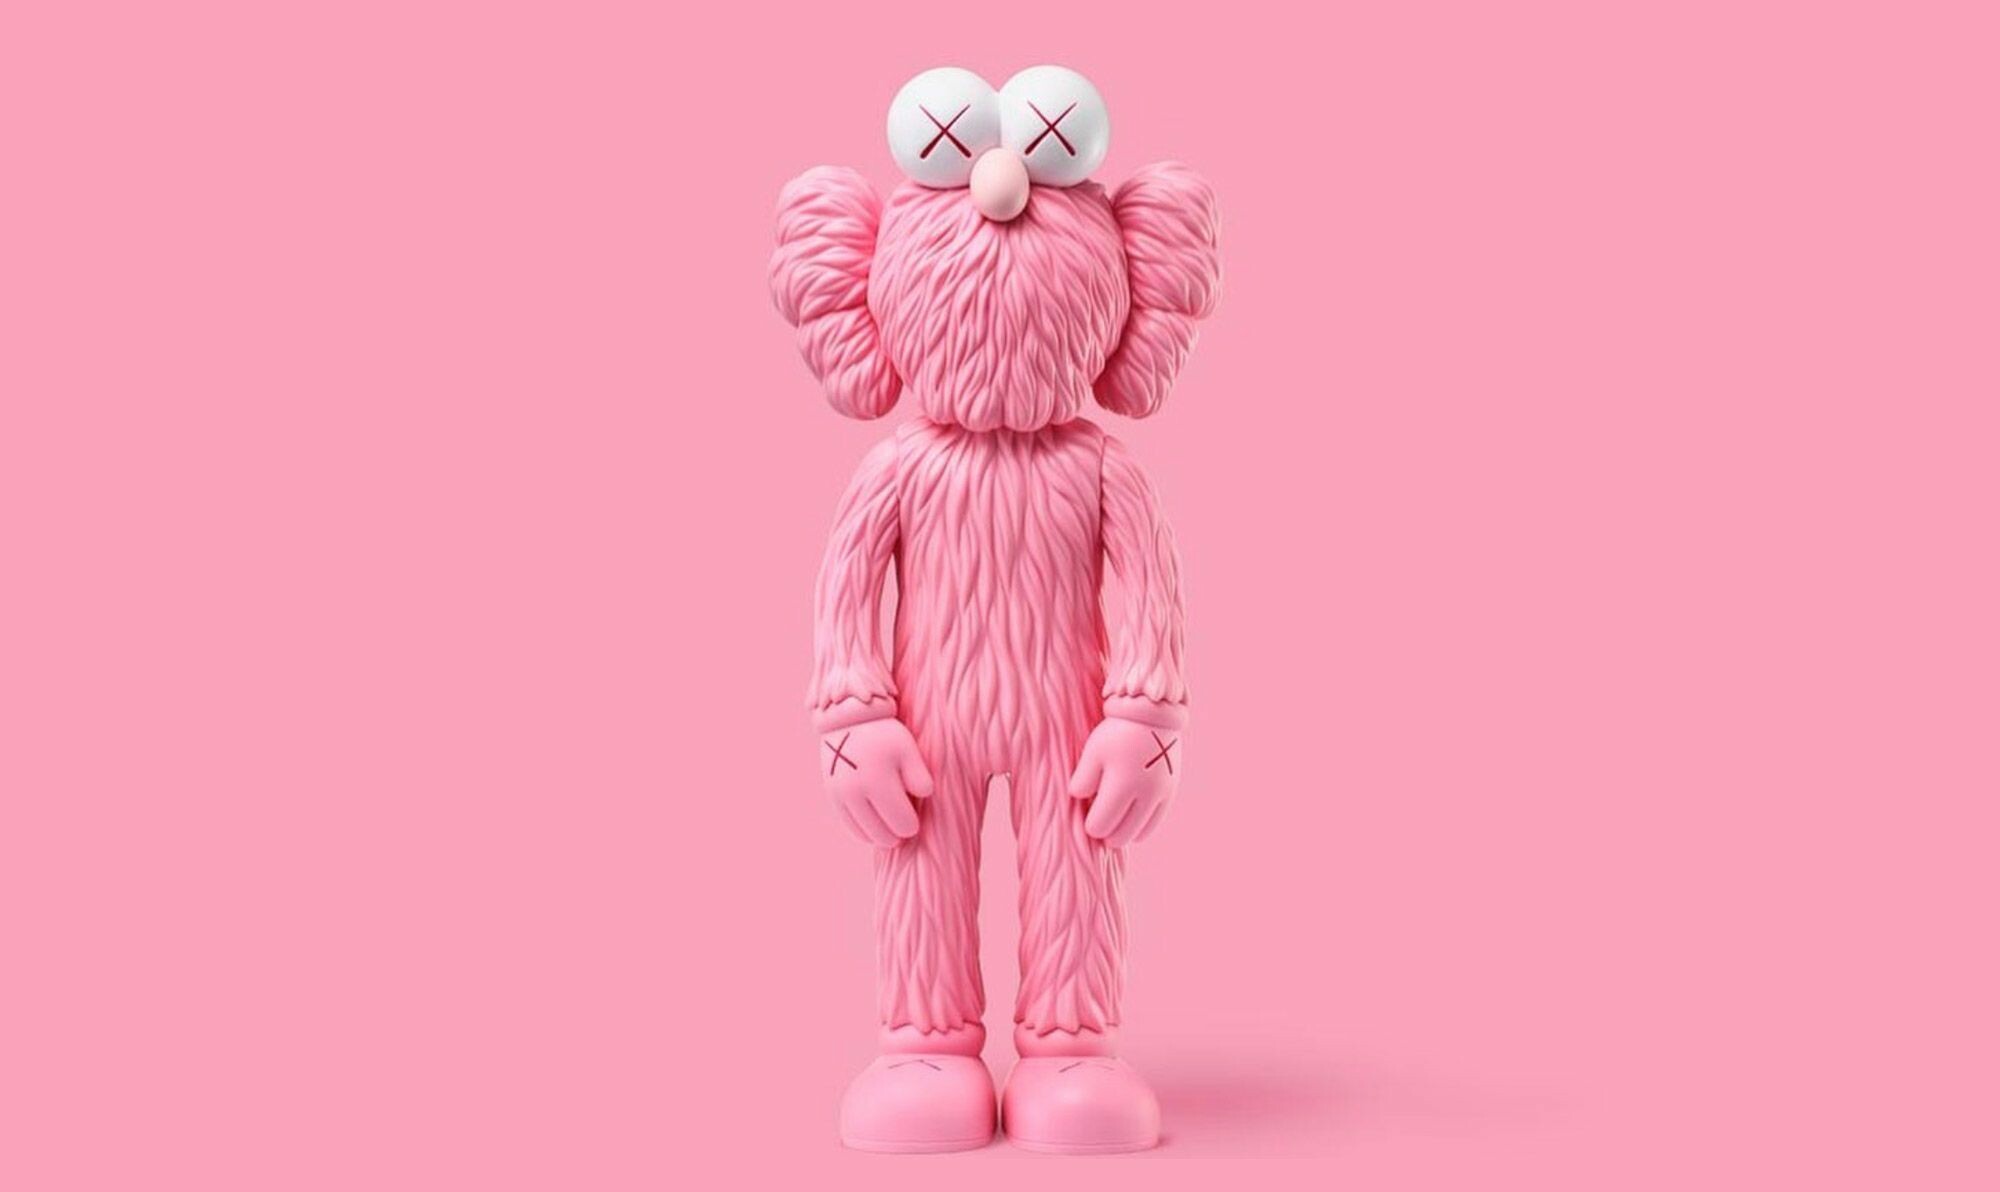 KAWS: Has released several limited-edition toys and sculptures over the years. 2000x1200 HD Wallpaper.